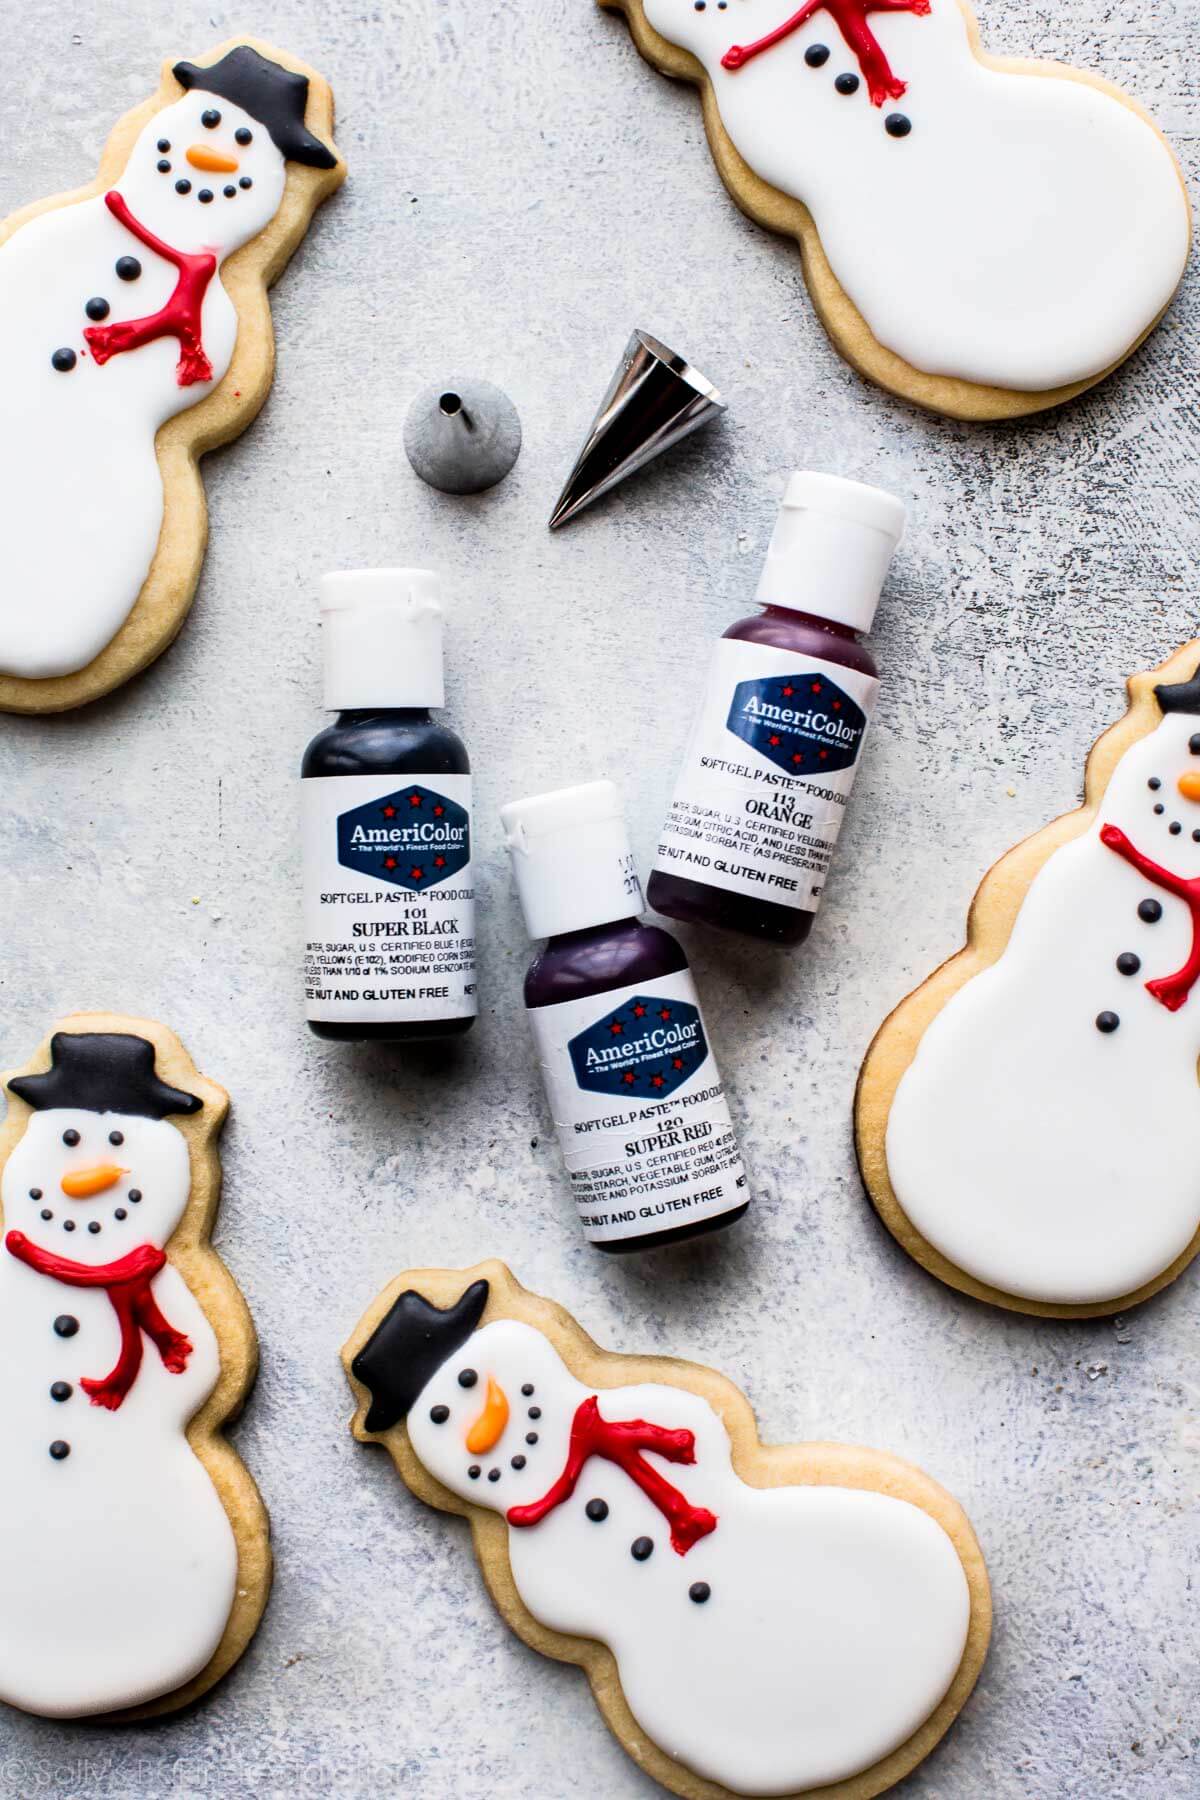 gel food coloring bottles, piping tips, and decorated snowman sugar cookies